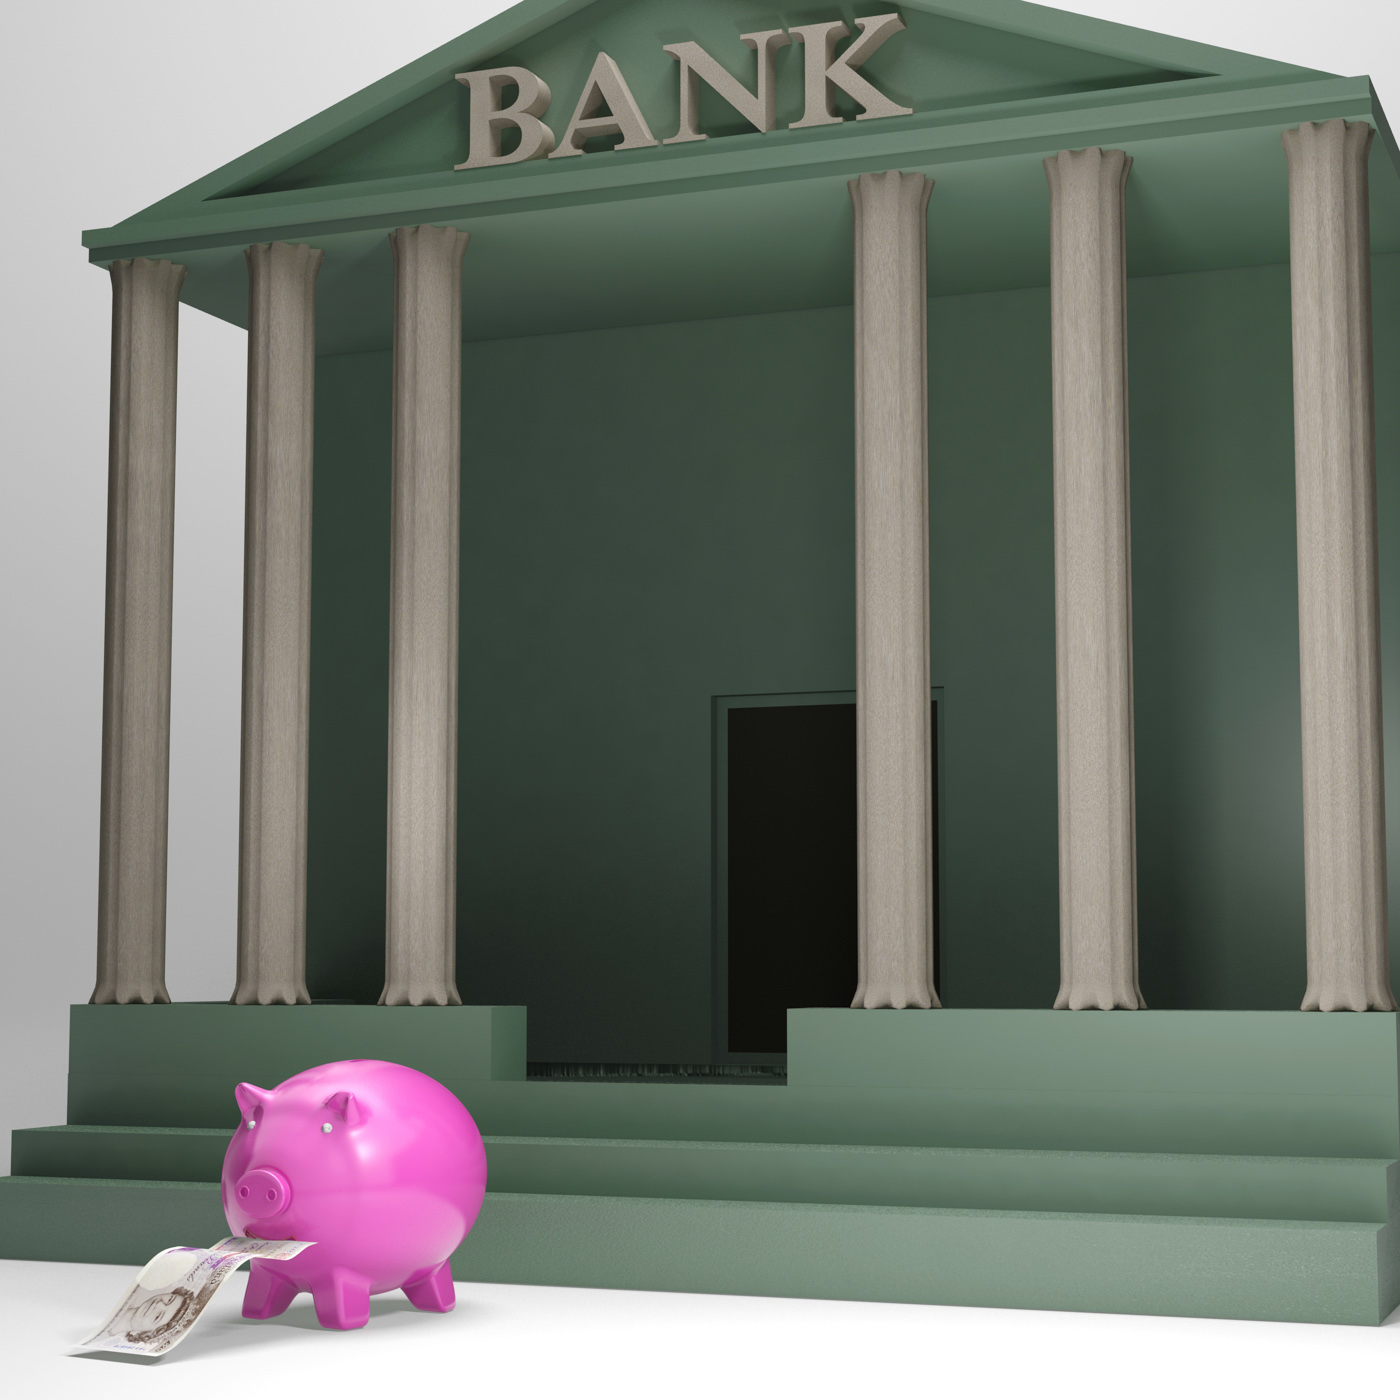 Piggybank Leaving Bank Shows Money Withdrawal, Pounds, Wealth, Security, Savings, HQ Photo